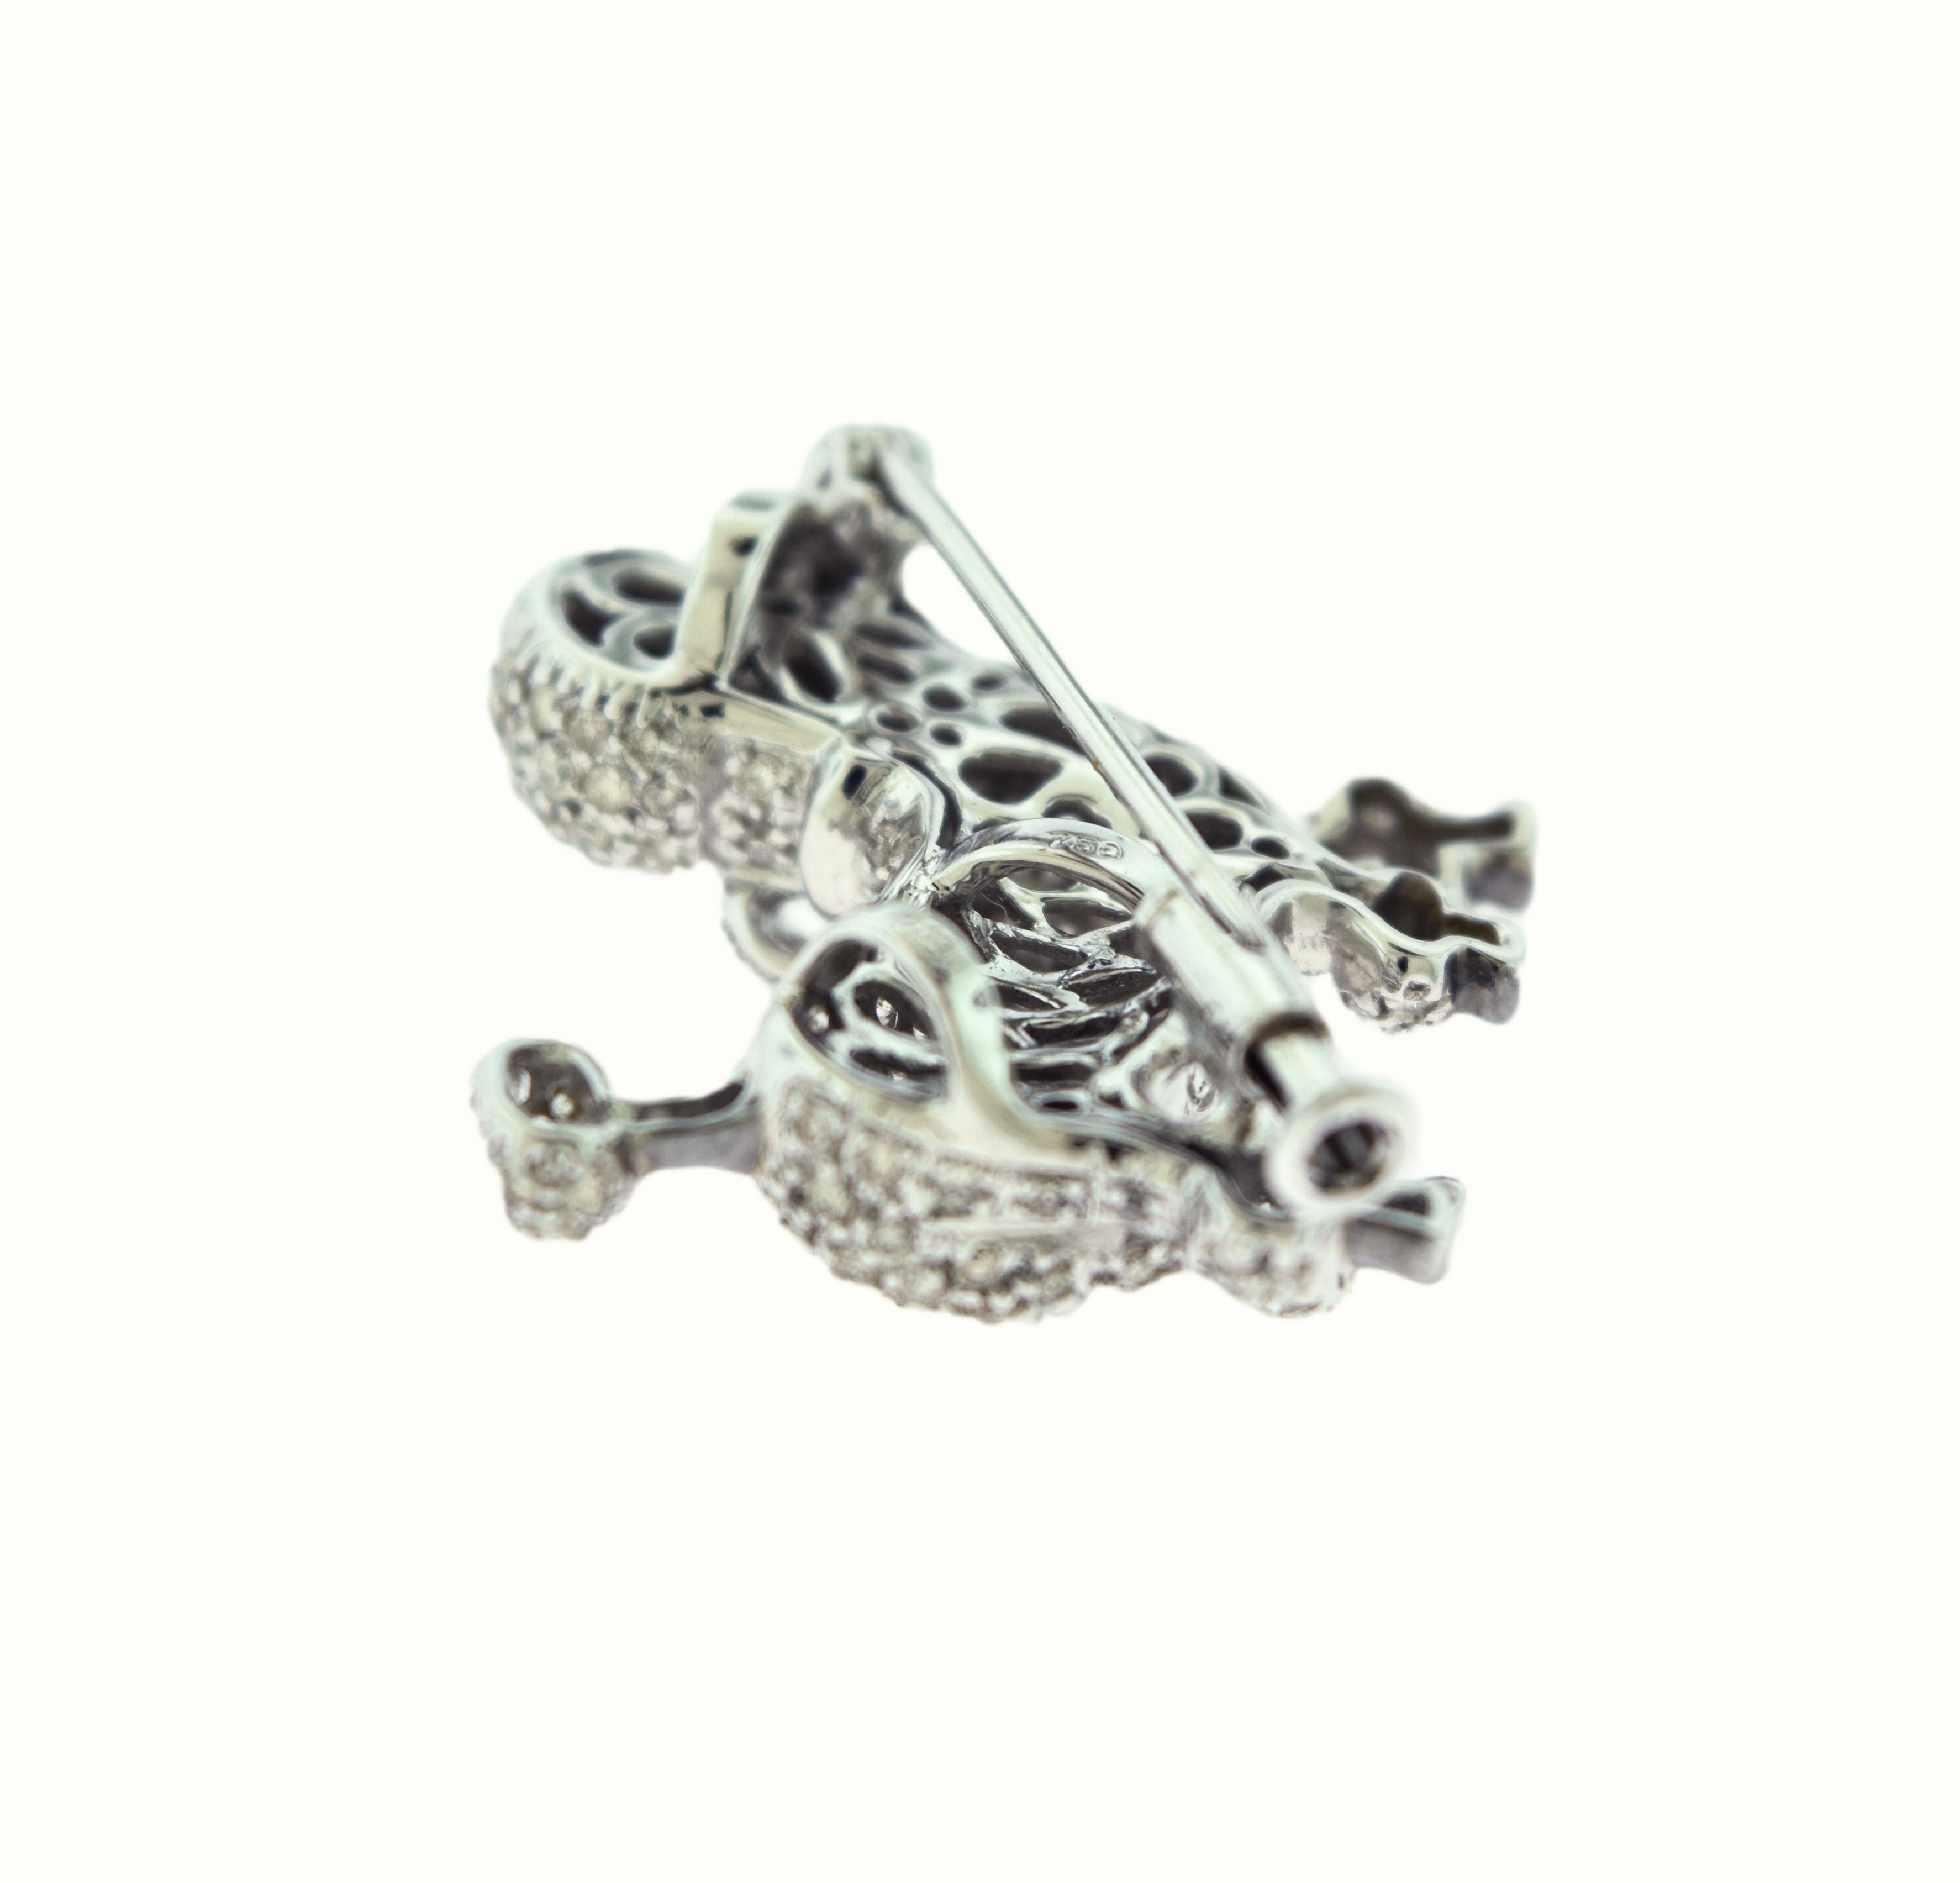 Women's or Men's Round Diamond Dog Poodle Brooch, Pin, and Pendant in 18 Karat White Gold